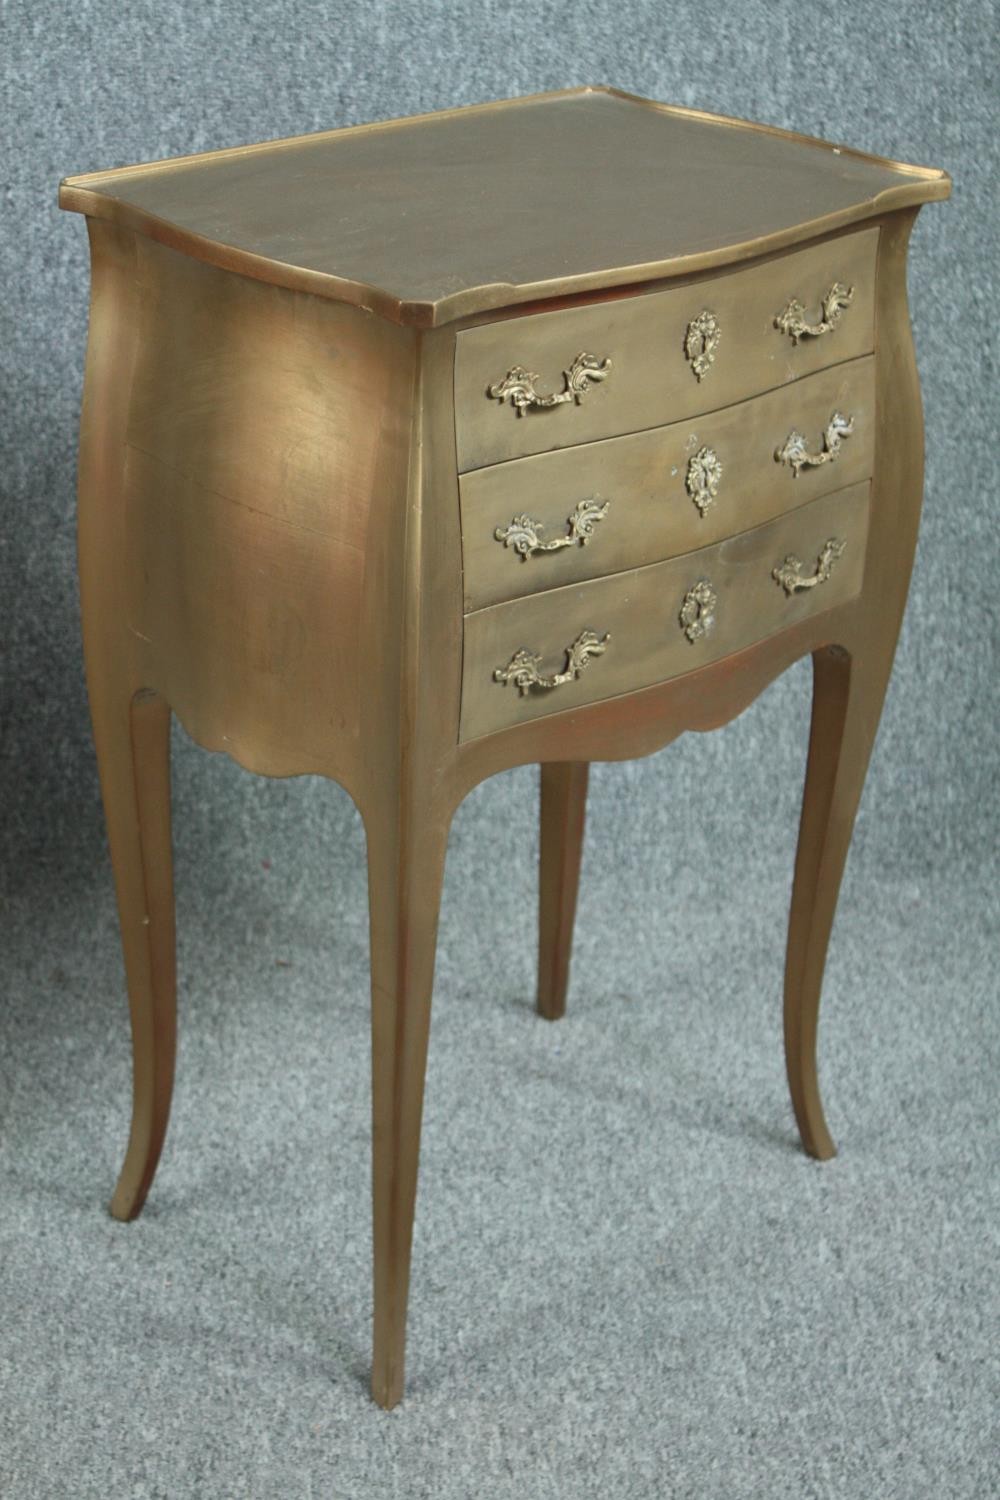 Bedside chests, a pair, Louis XV style gold lacquered. H.74 W.49 D.34cm. (each) - Image 4 of 5